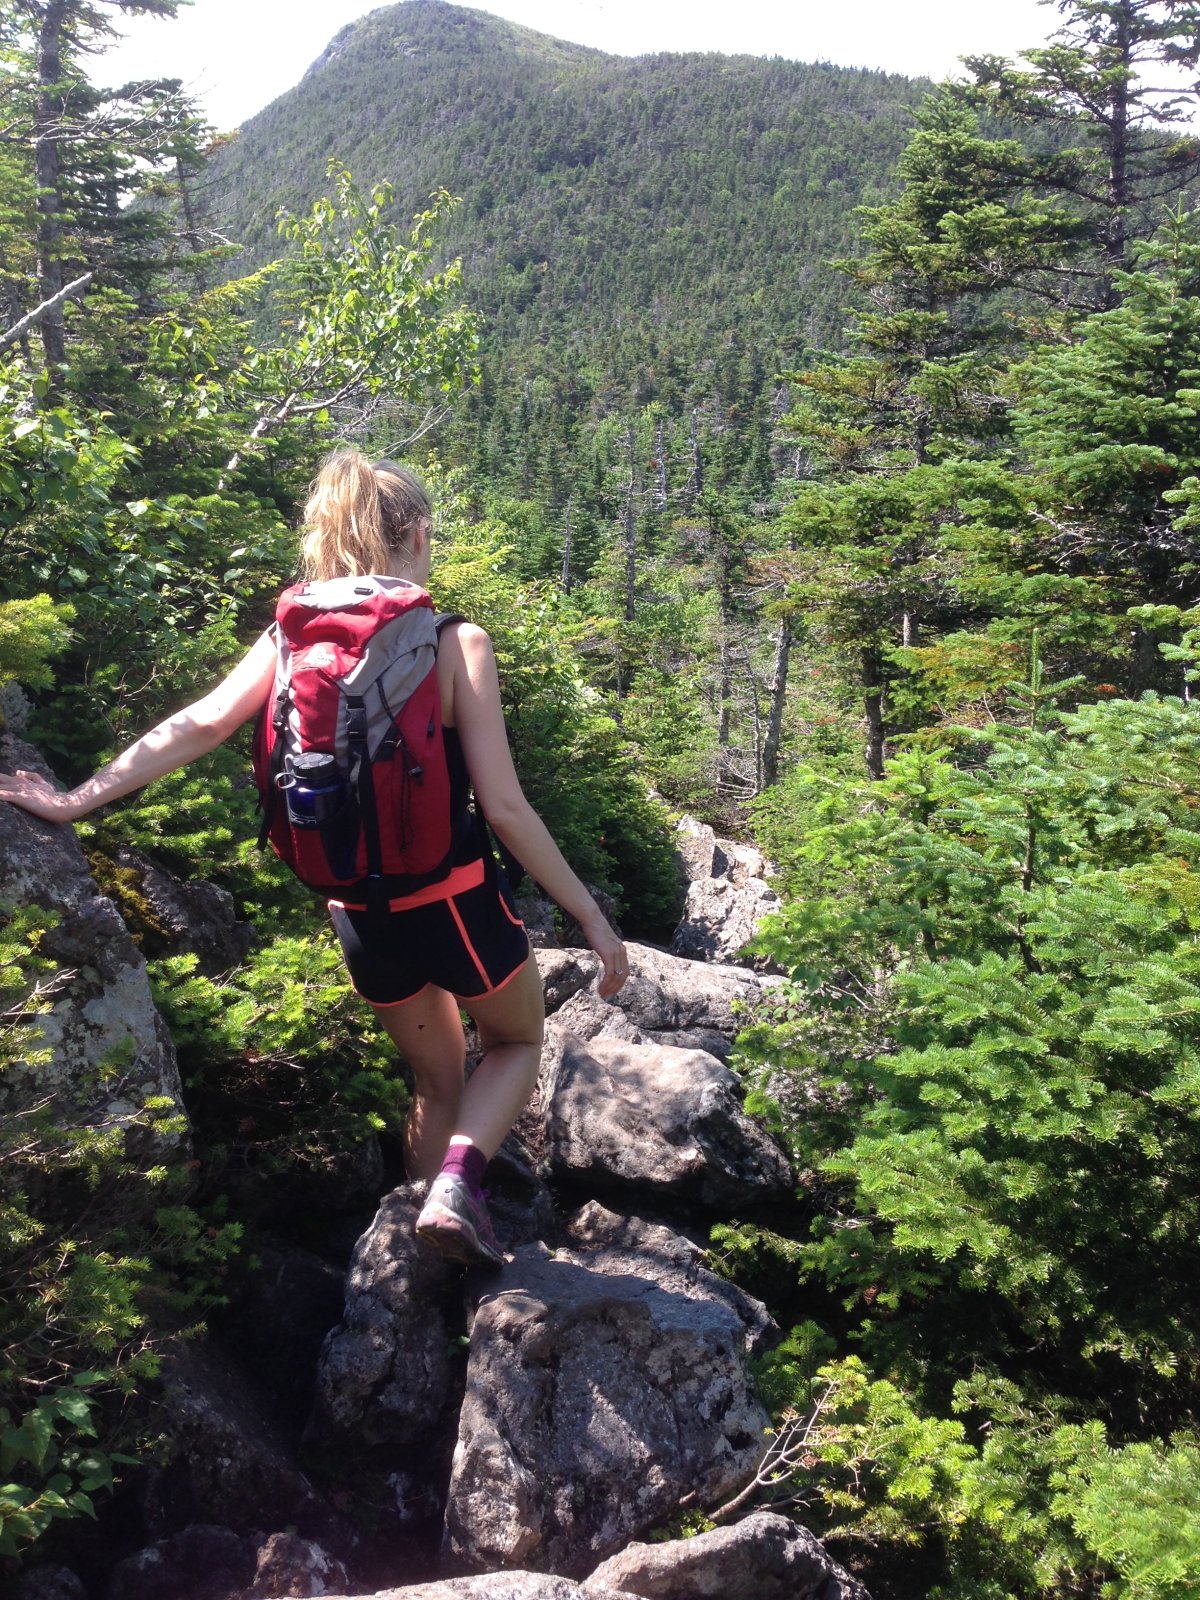 Did you know that hiking isn't covered on some travel health insurance policies? .